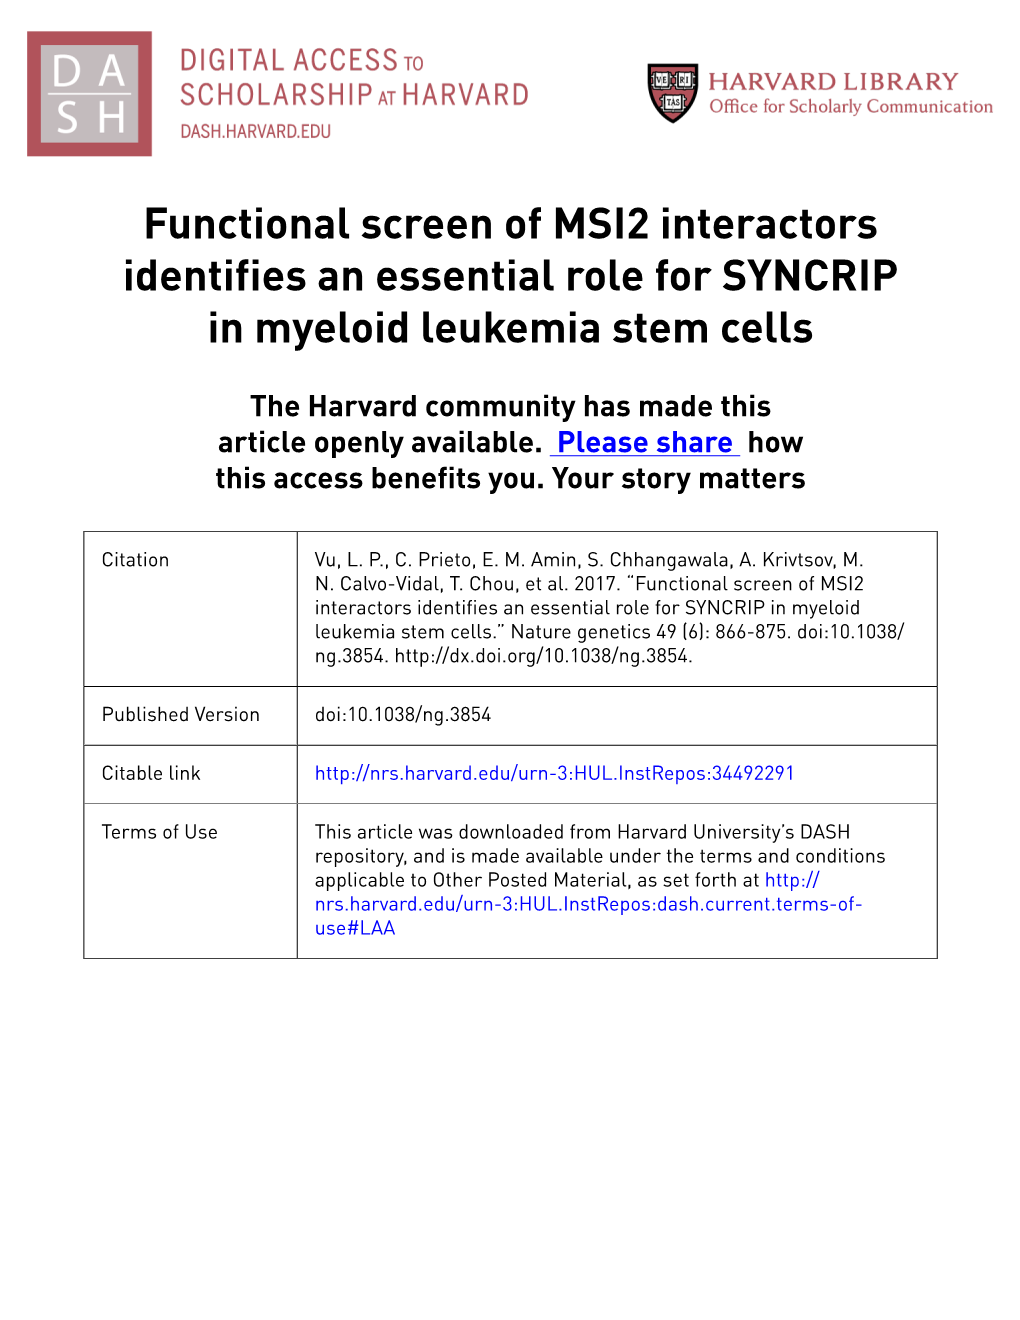 Functional Screen of MSI2 Interactors Identifies an Essential Role for SYNCRIP in Myeloid Leukemia Stem Cells